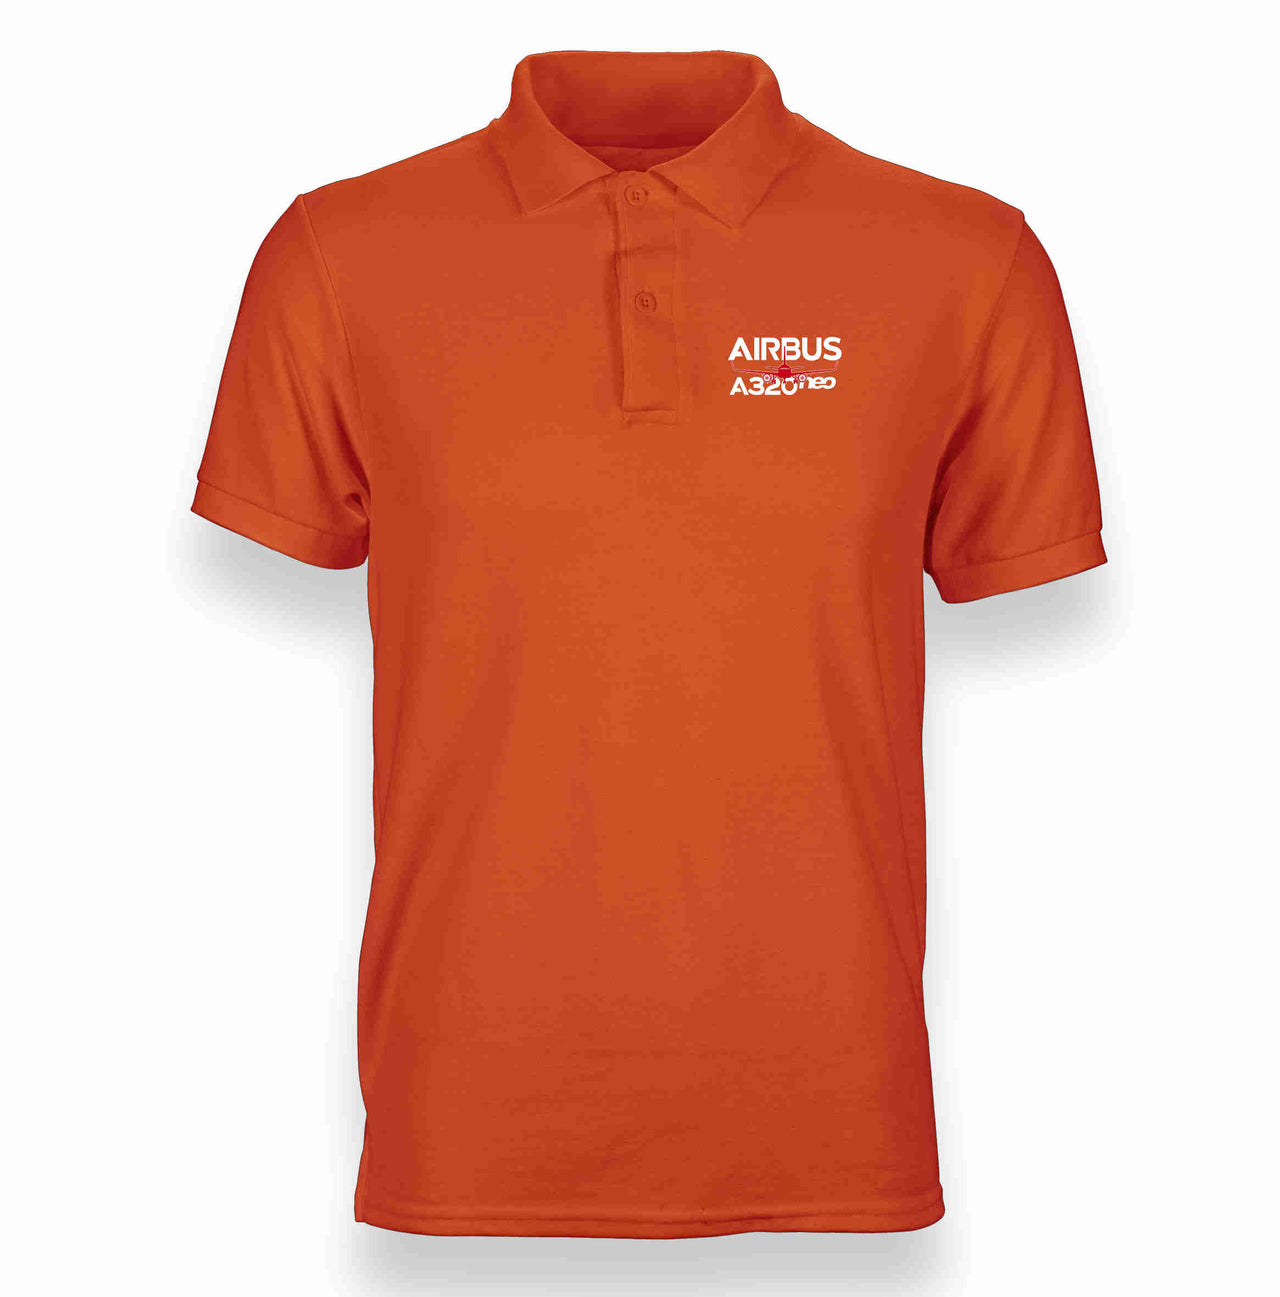 Amazing Airbus A320neo Designed "WOMEN" Polo T-Shirts